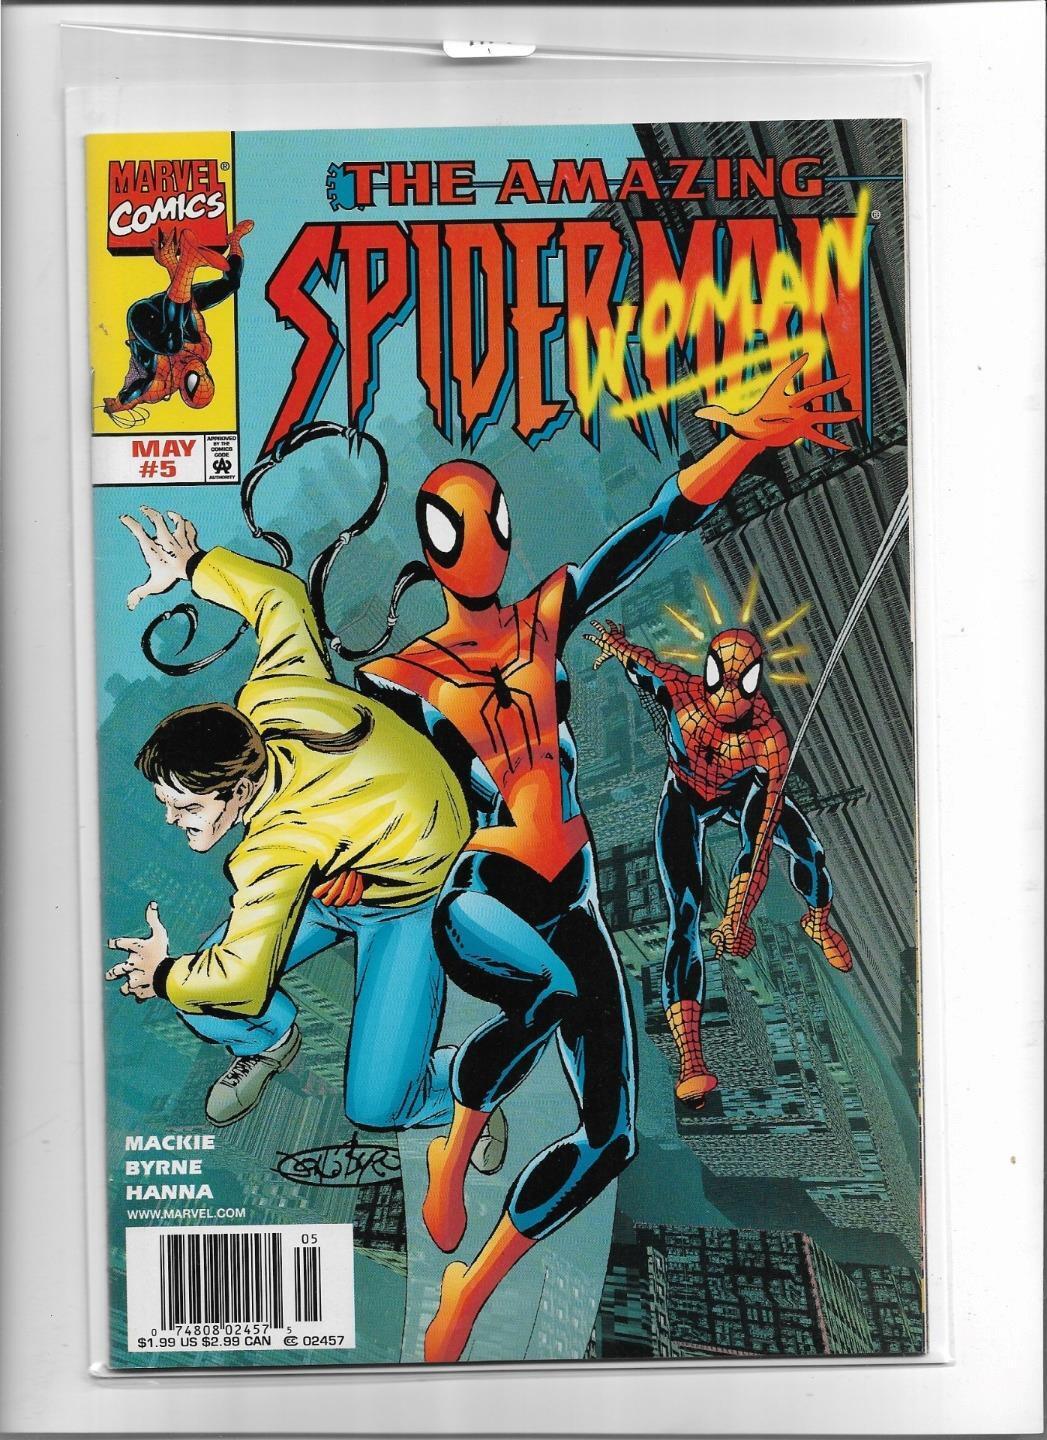 THE AMAZING SPIDER-MAN #5 1999 VERY FINE-NEAR MINT 9.0 4117 SPIDER-WOMAN